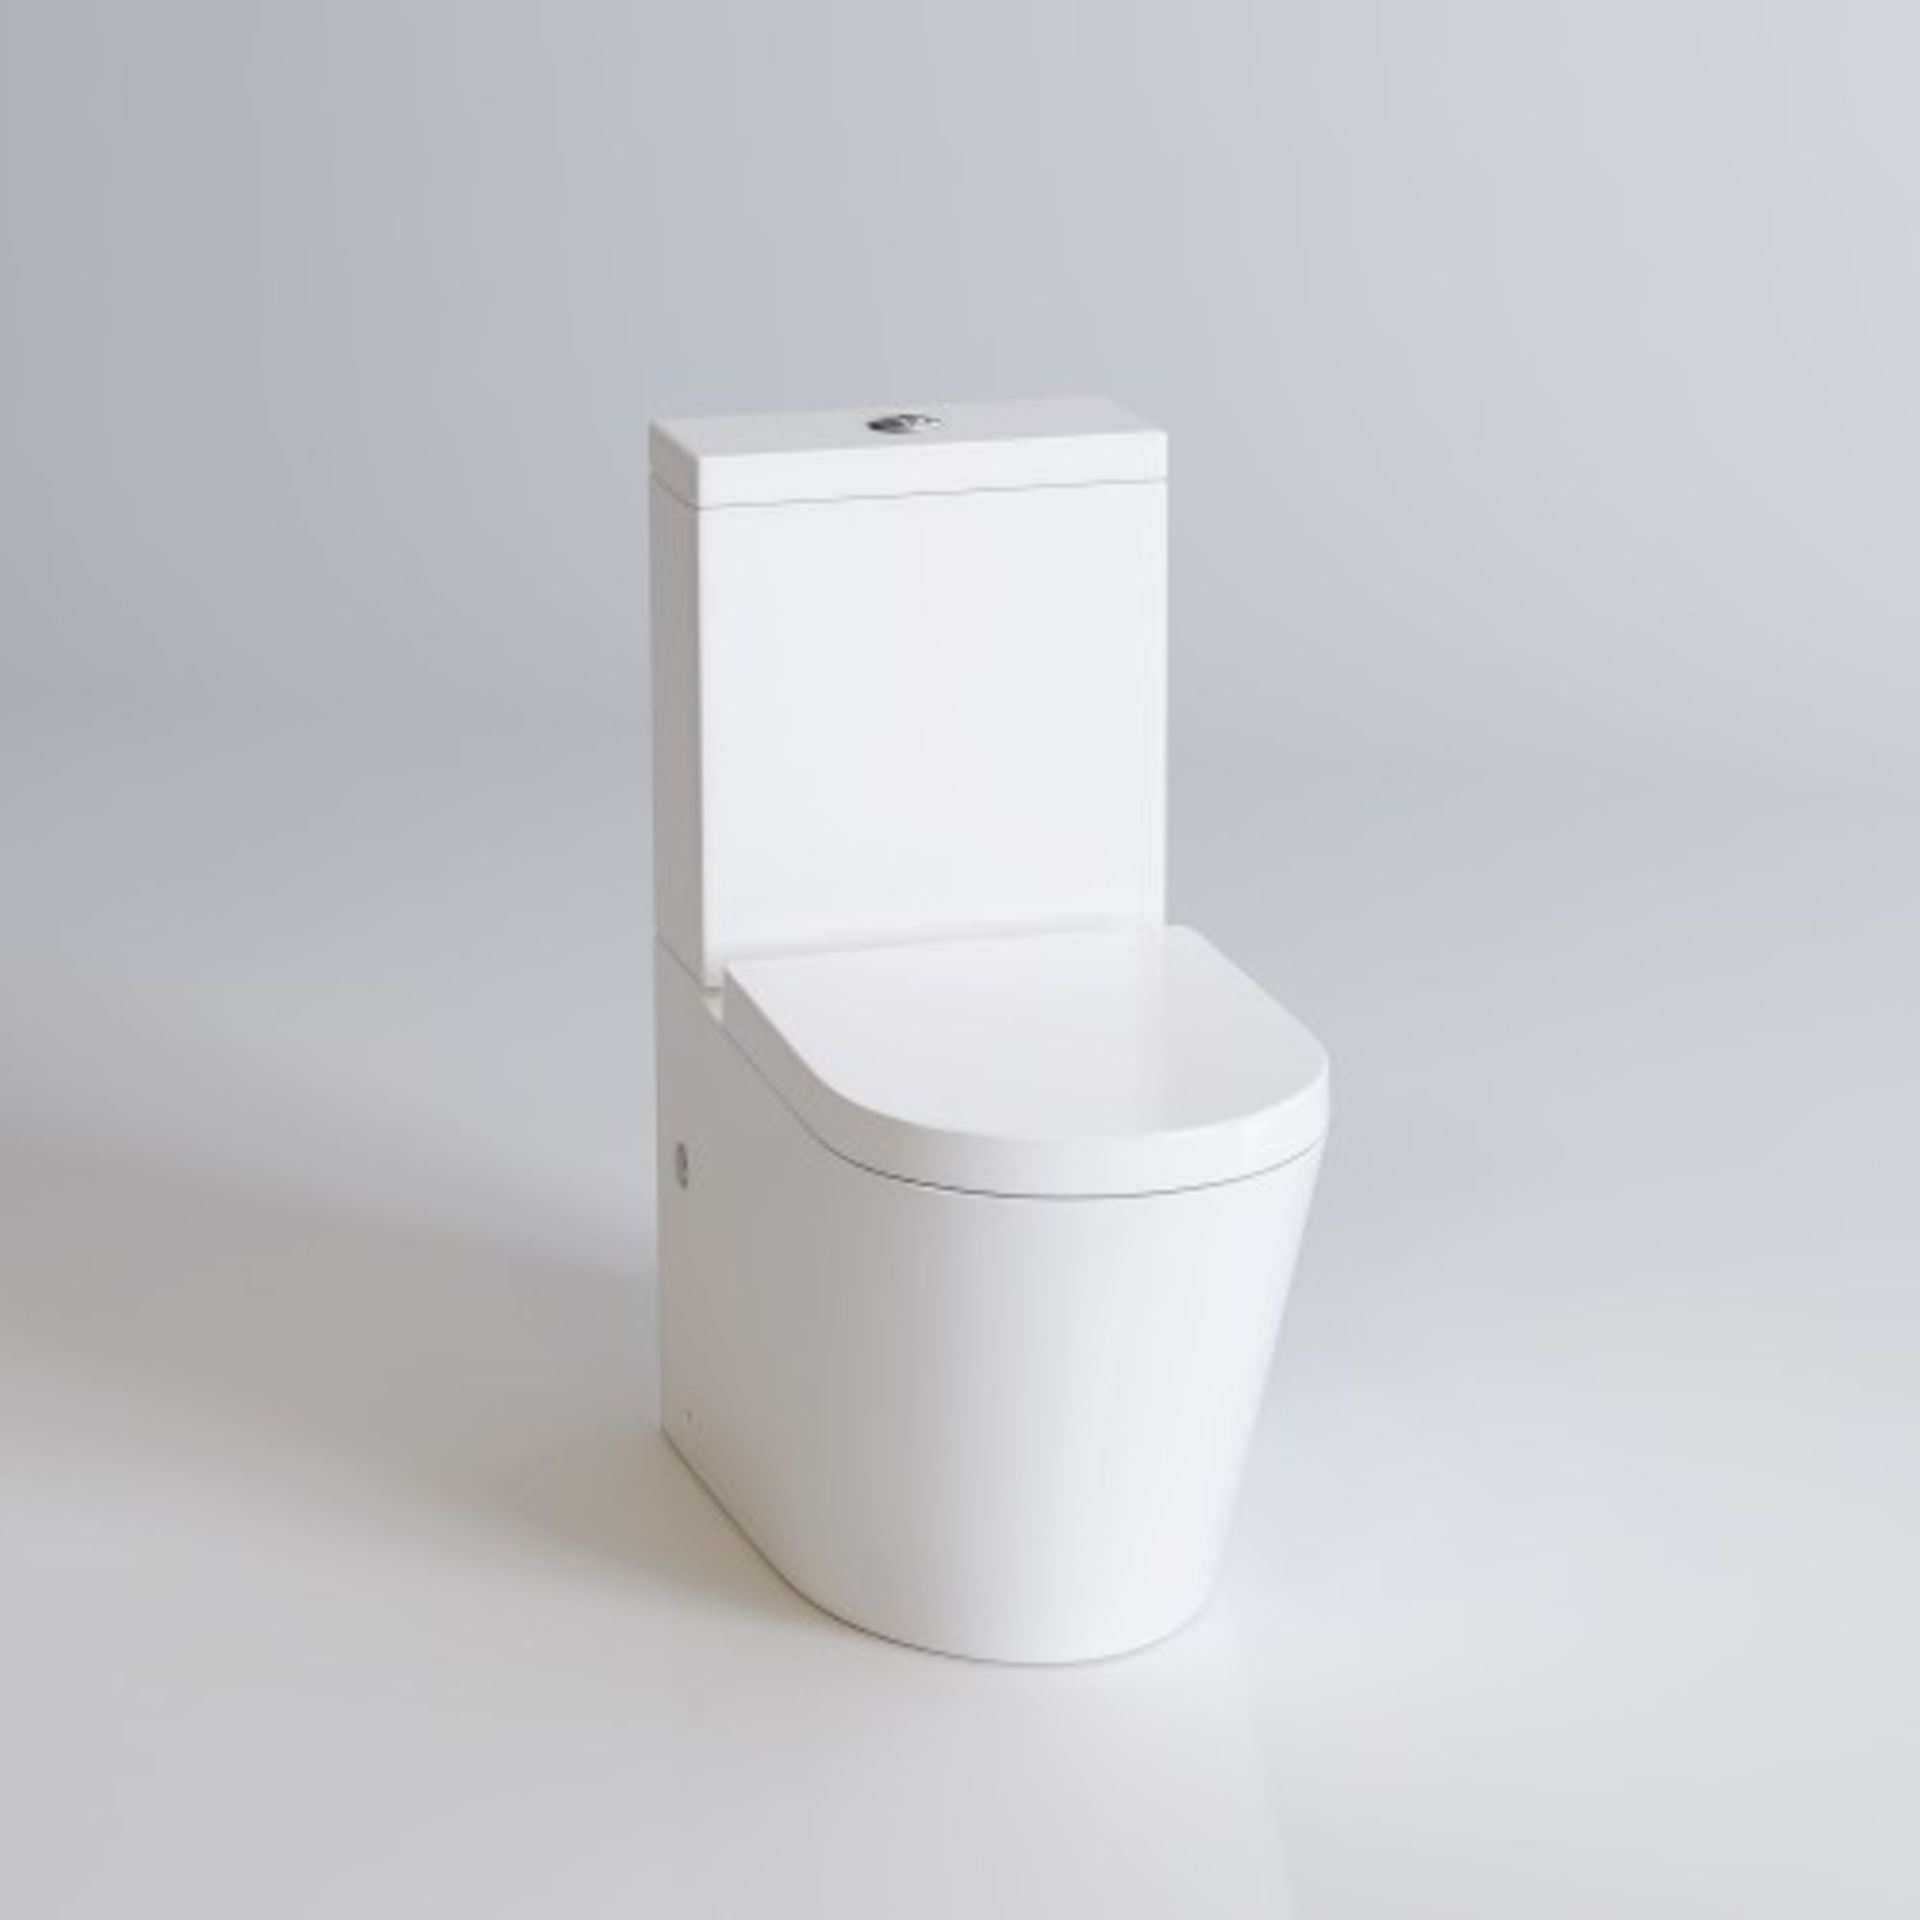 New Lyon II Close Coupled Toilet & Cistern Inc Lux - Image 2 of 2